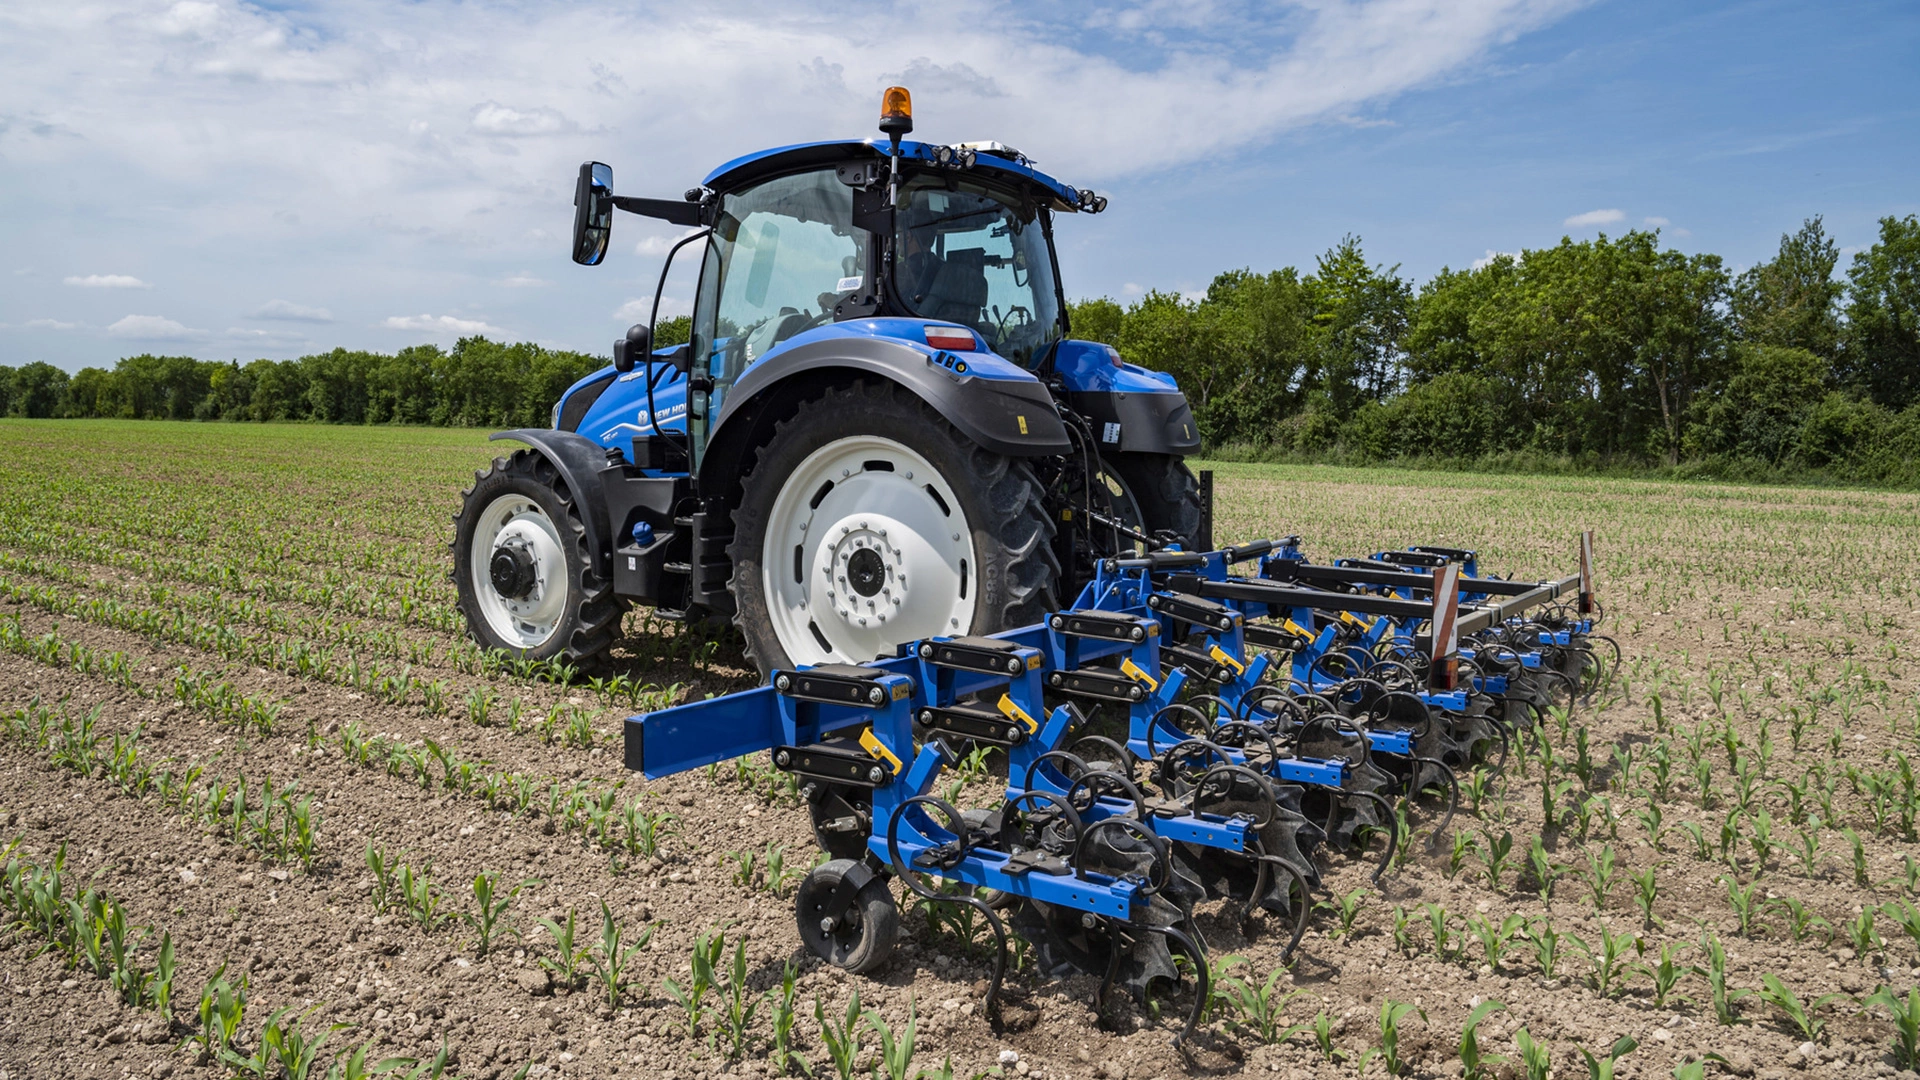 Tractor with SRC & SRC SmartSteer Interrow Cultivators in motion, cultivating the soil between green rows on a farm field